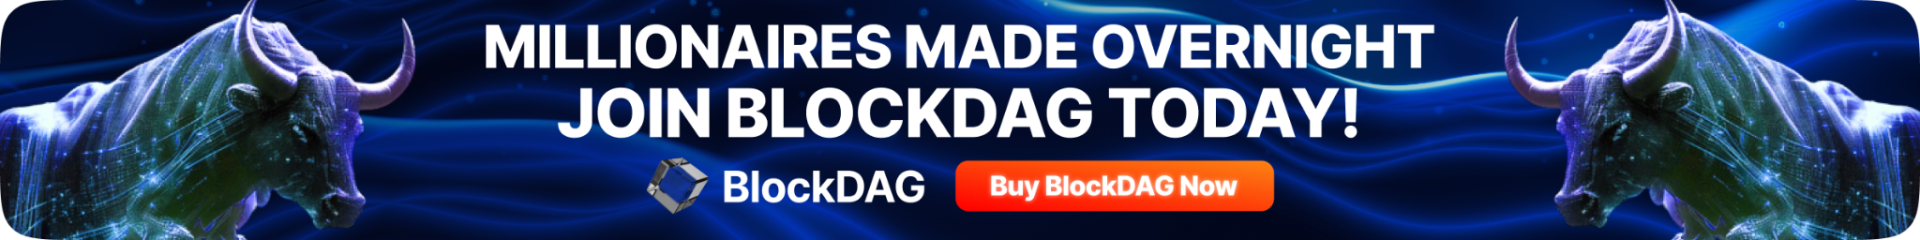 BlockDAG’s Dev Release 29 Launched: Redefining Blockchain Security With RandomX Protocol Amidst 5700 Miner Sales